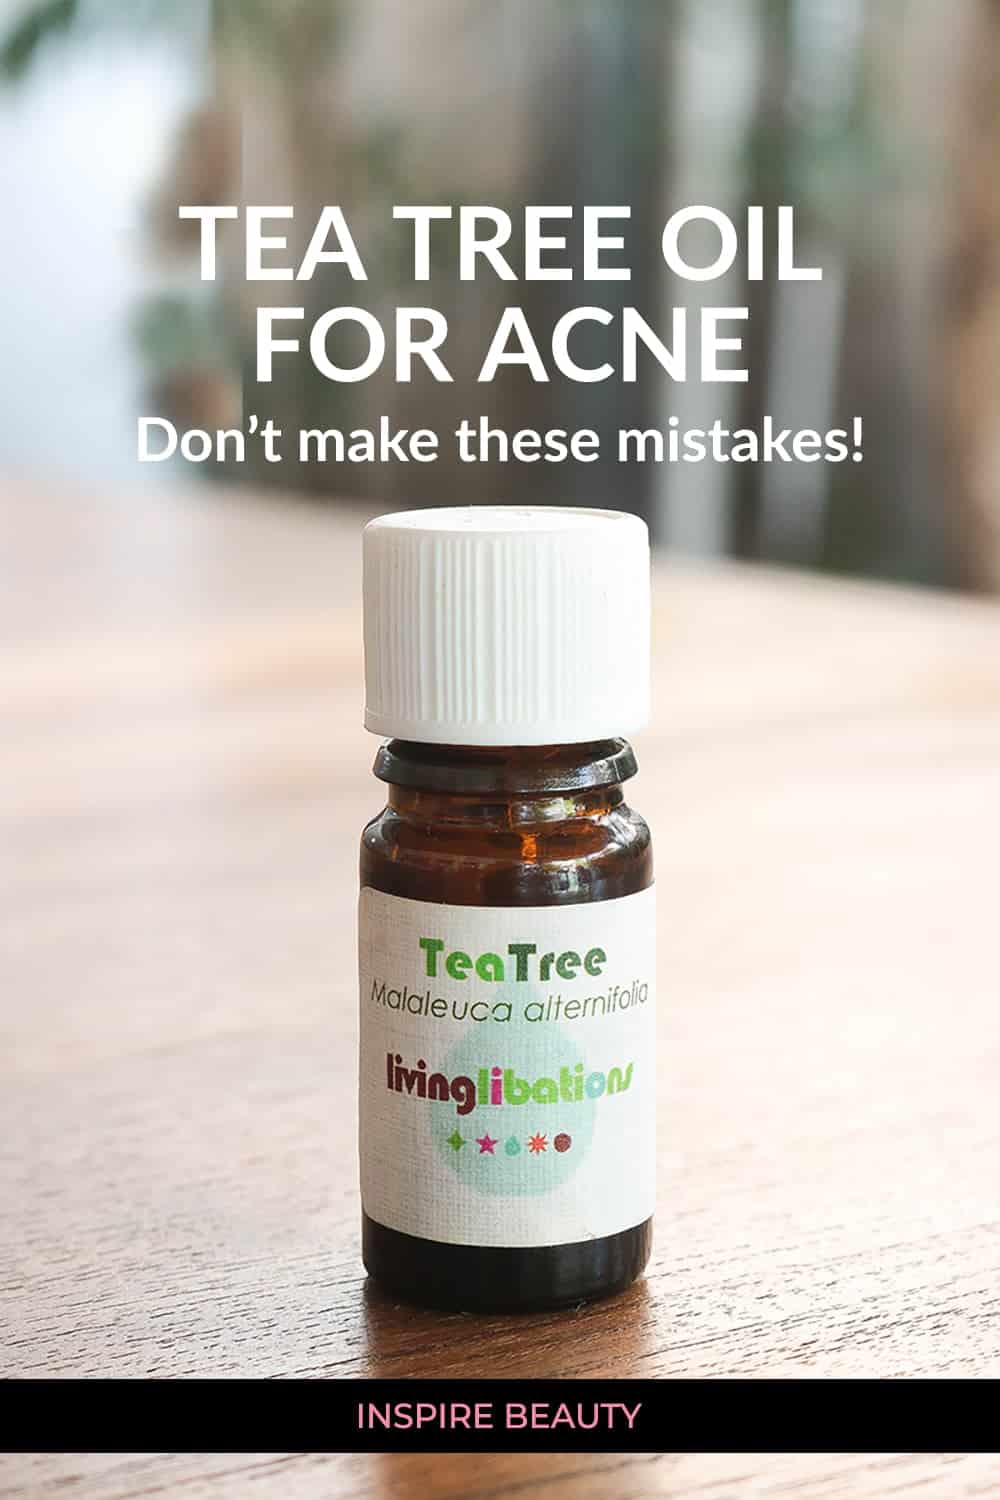 How to use Tea Tree Oil for acne, blemishes and pimples, plus the mistakes to avoid.